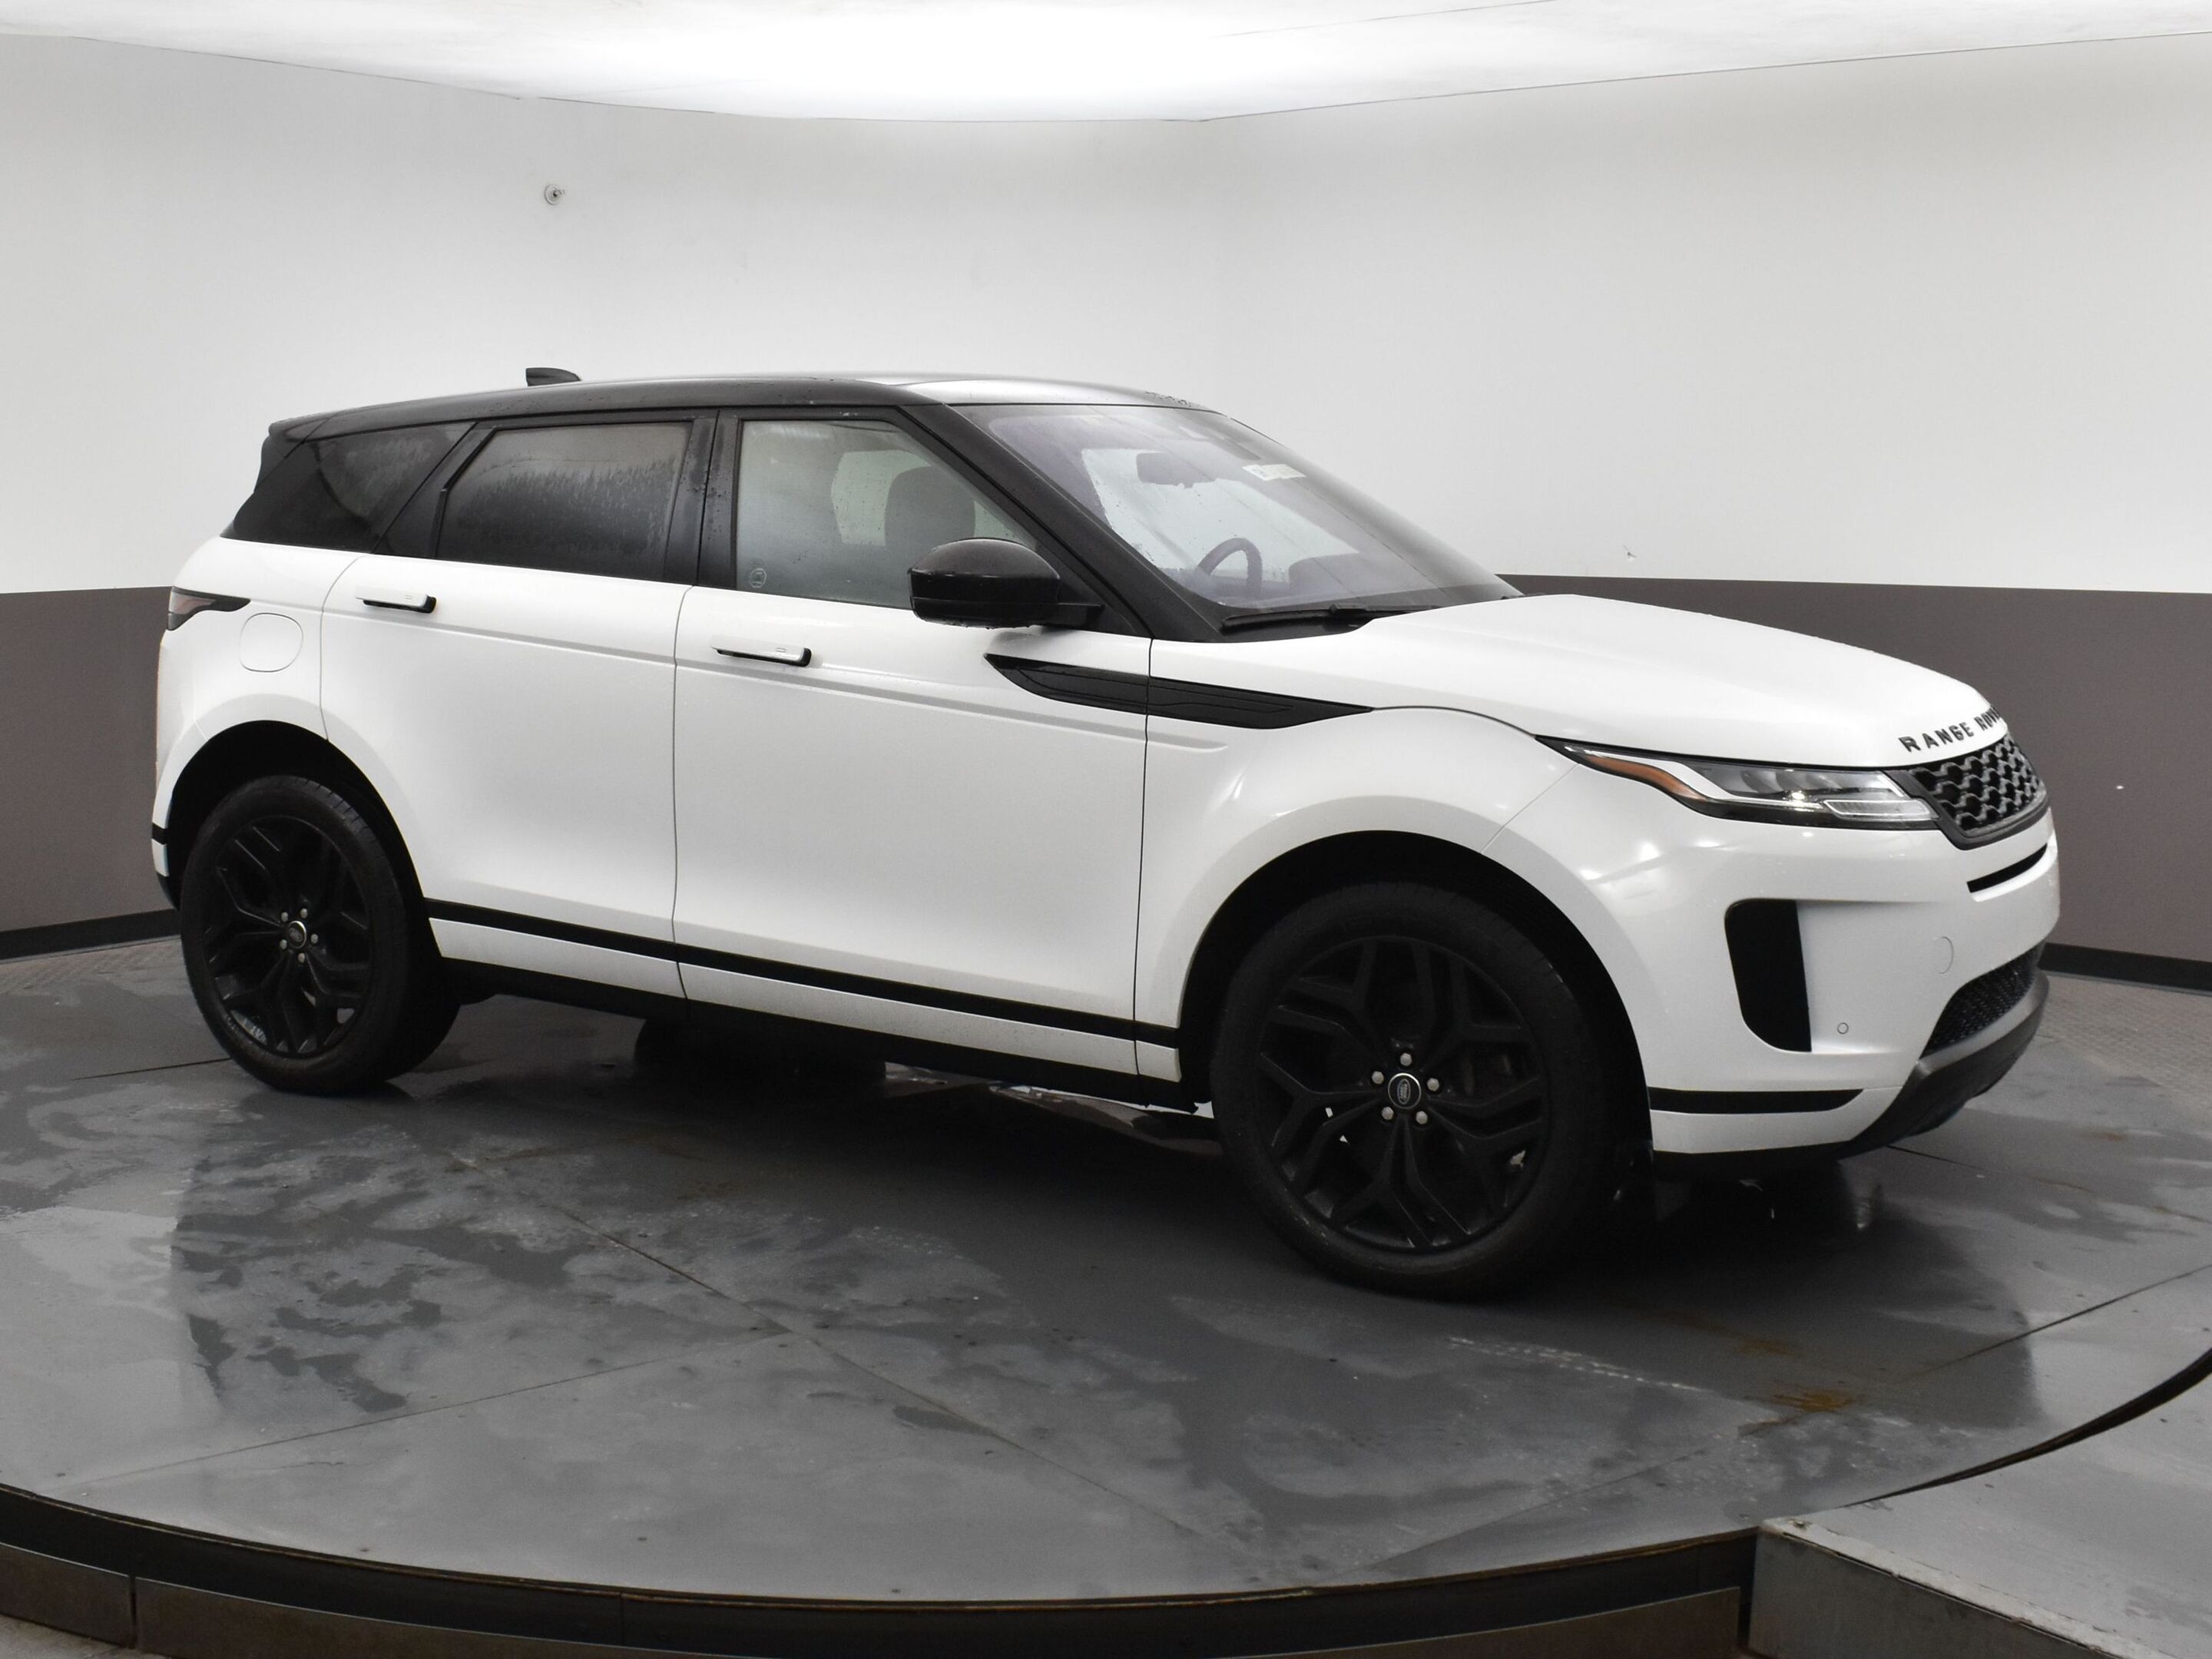 2020 Land Rover Range Rover Evoque S S WITH HEATED SEATS, DUAL CLIMATE CONTROL, SMART